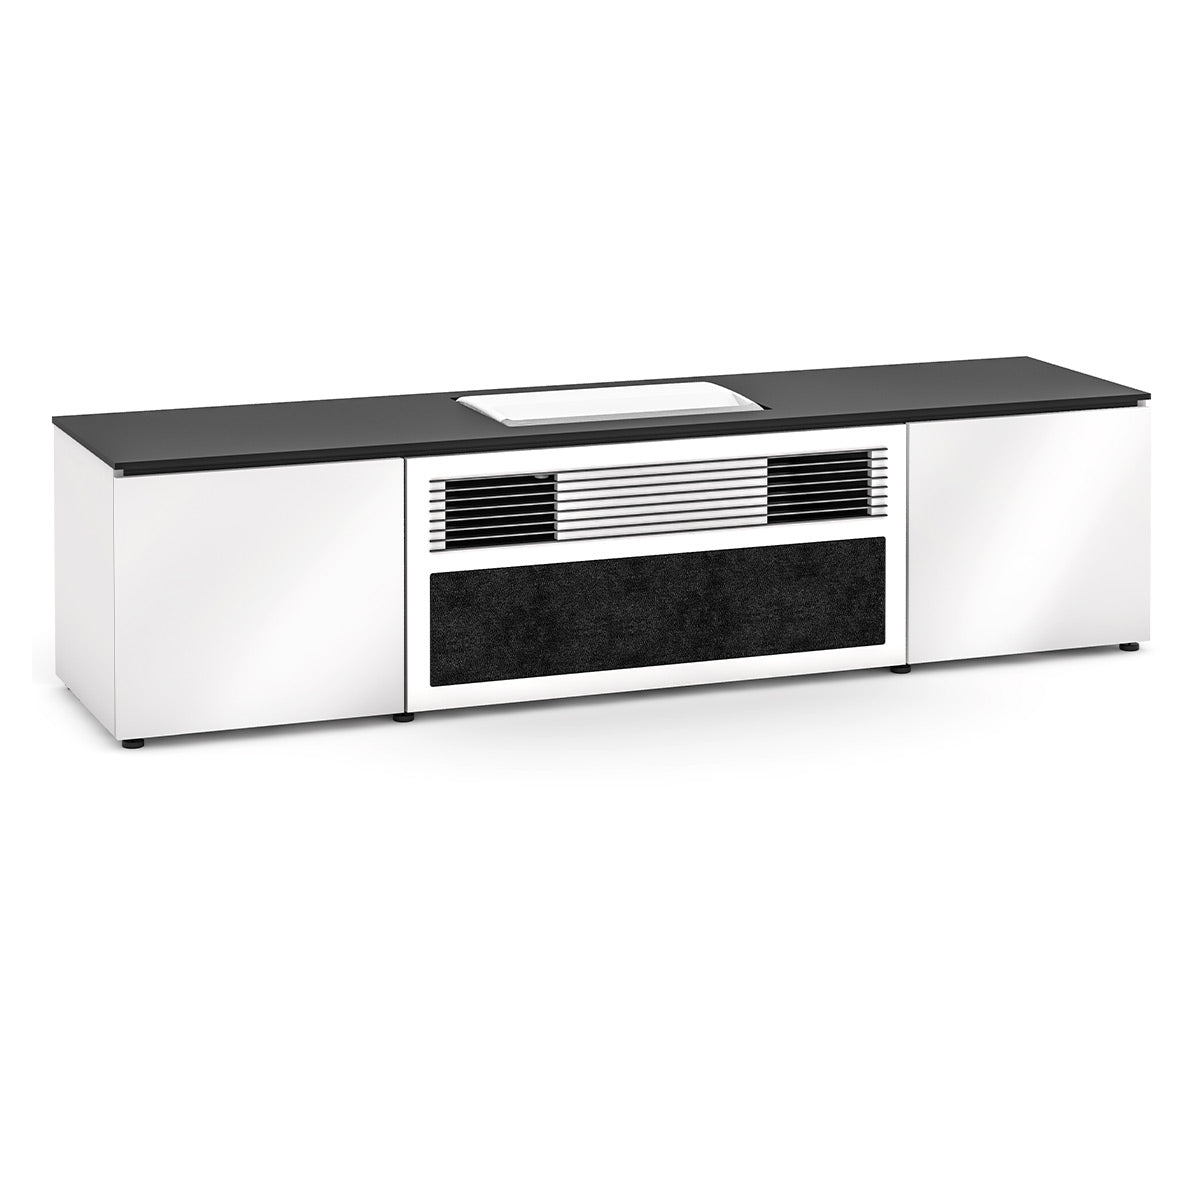 Salamander Miami 245 UST Projector Integrated Cabinet for Samsung LSP7TF (Gloss White)